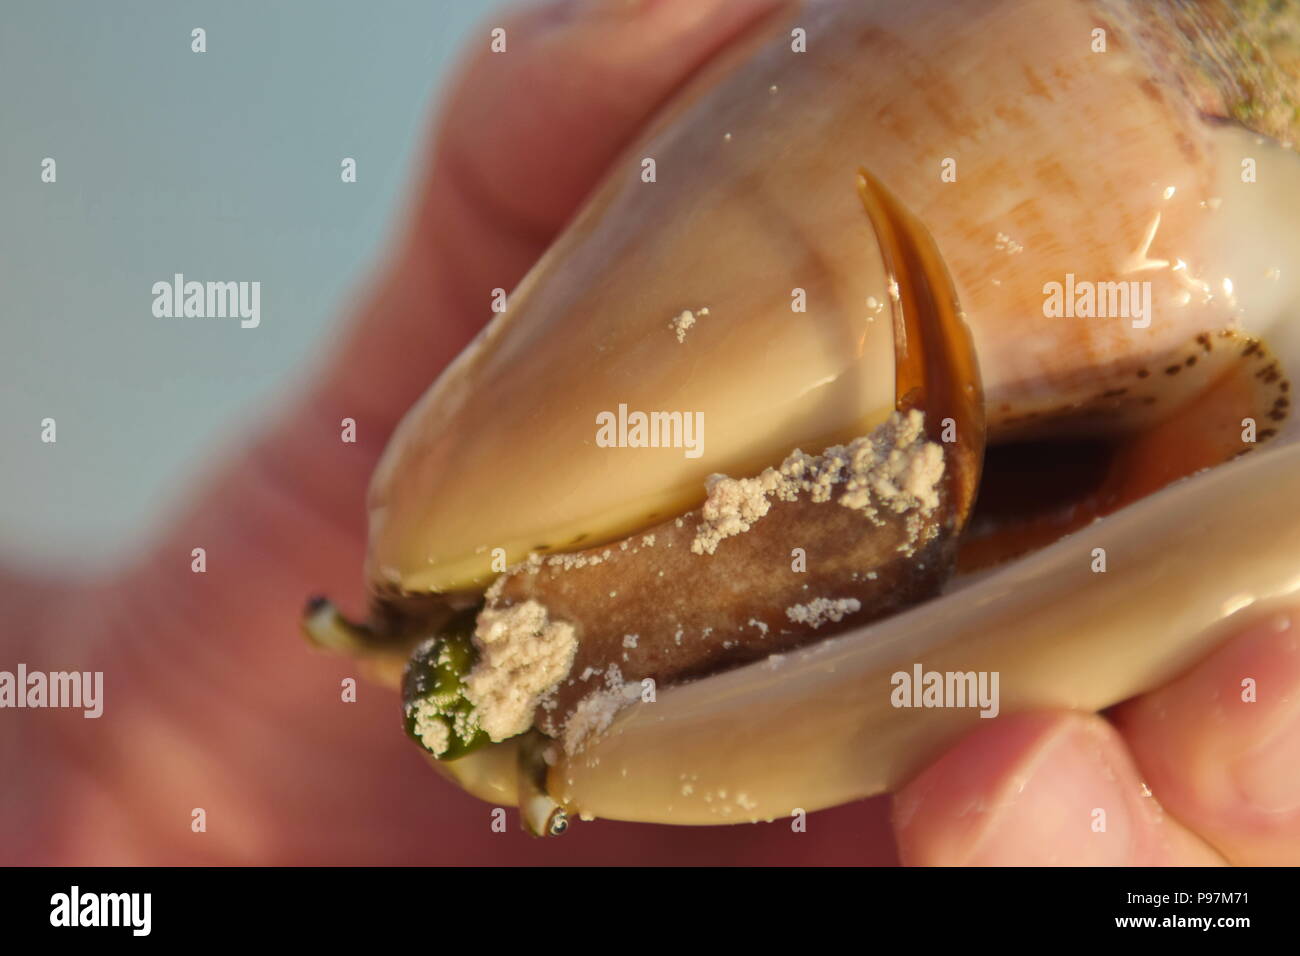 Close up photo of small live conch shell found on the sand early morning on the beach in the Bahamas, area known for Conch shells. Stock Photo